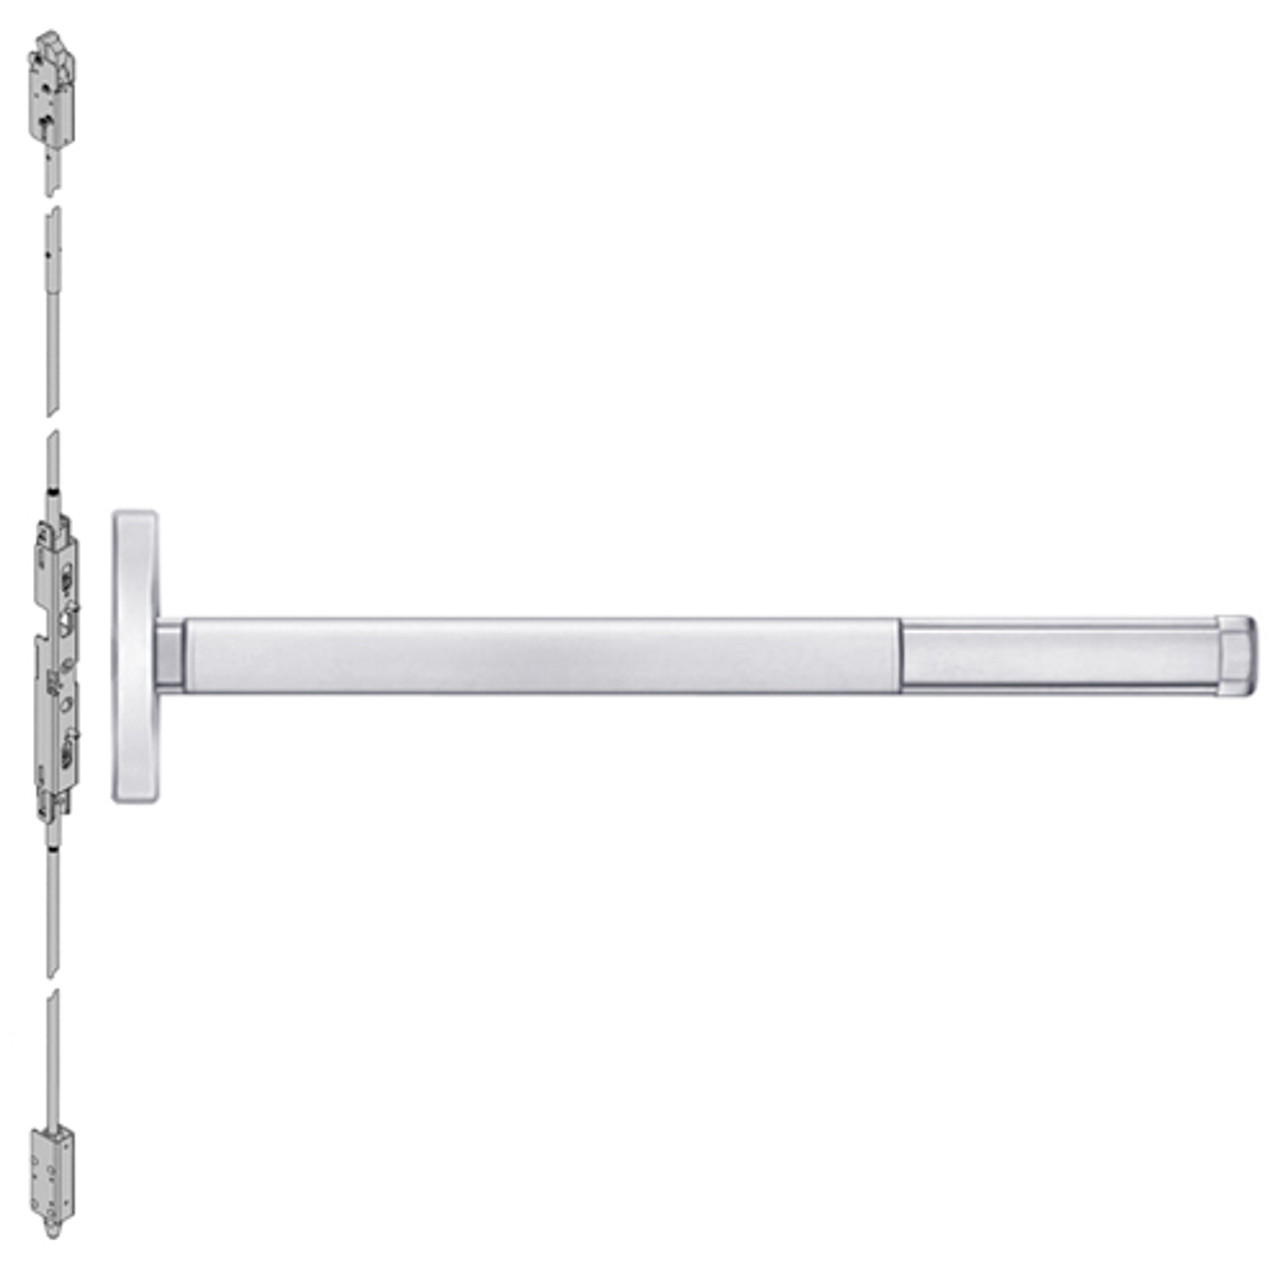 DE2602-625-36 PHI 2600 Series Concealed Vertical Rod Exit Device with Delayed Egress Prepped for Dummy Trim in Bright Chrome Finish